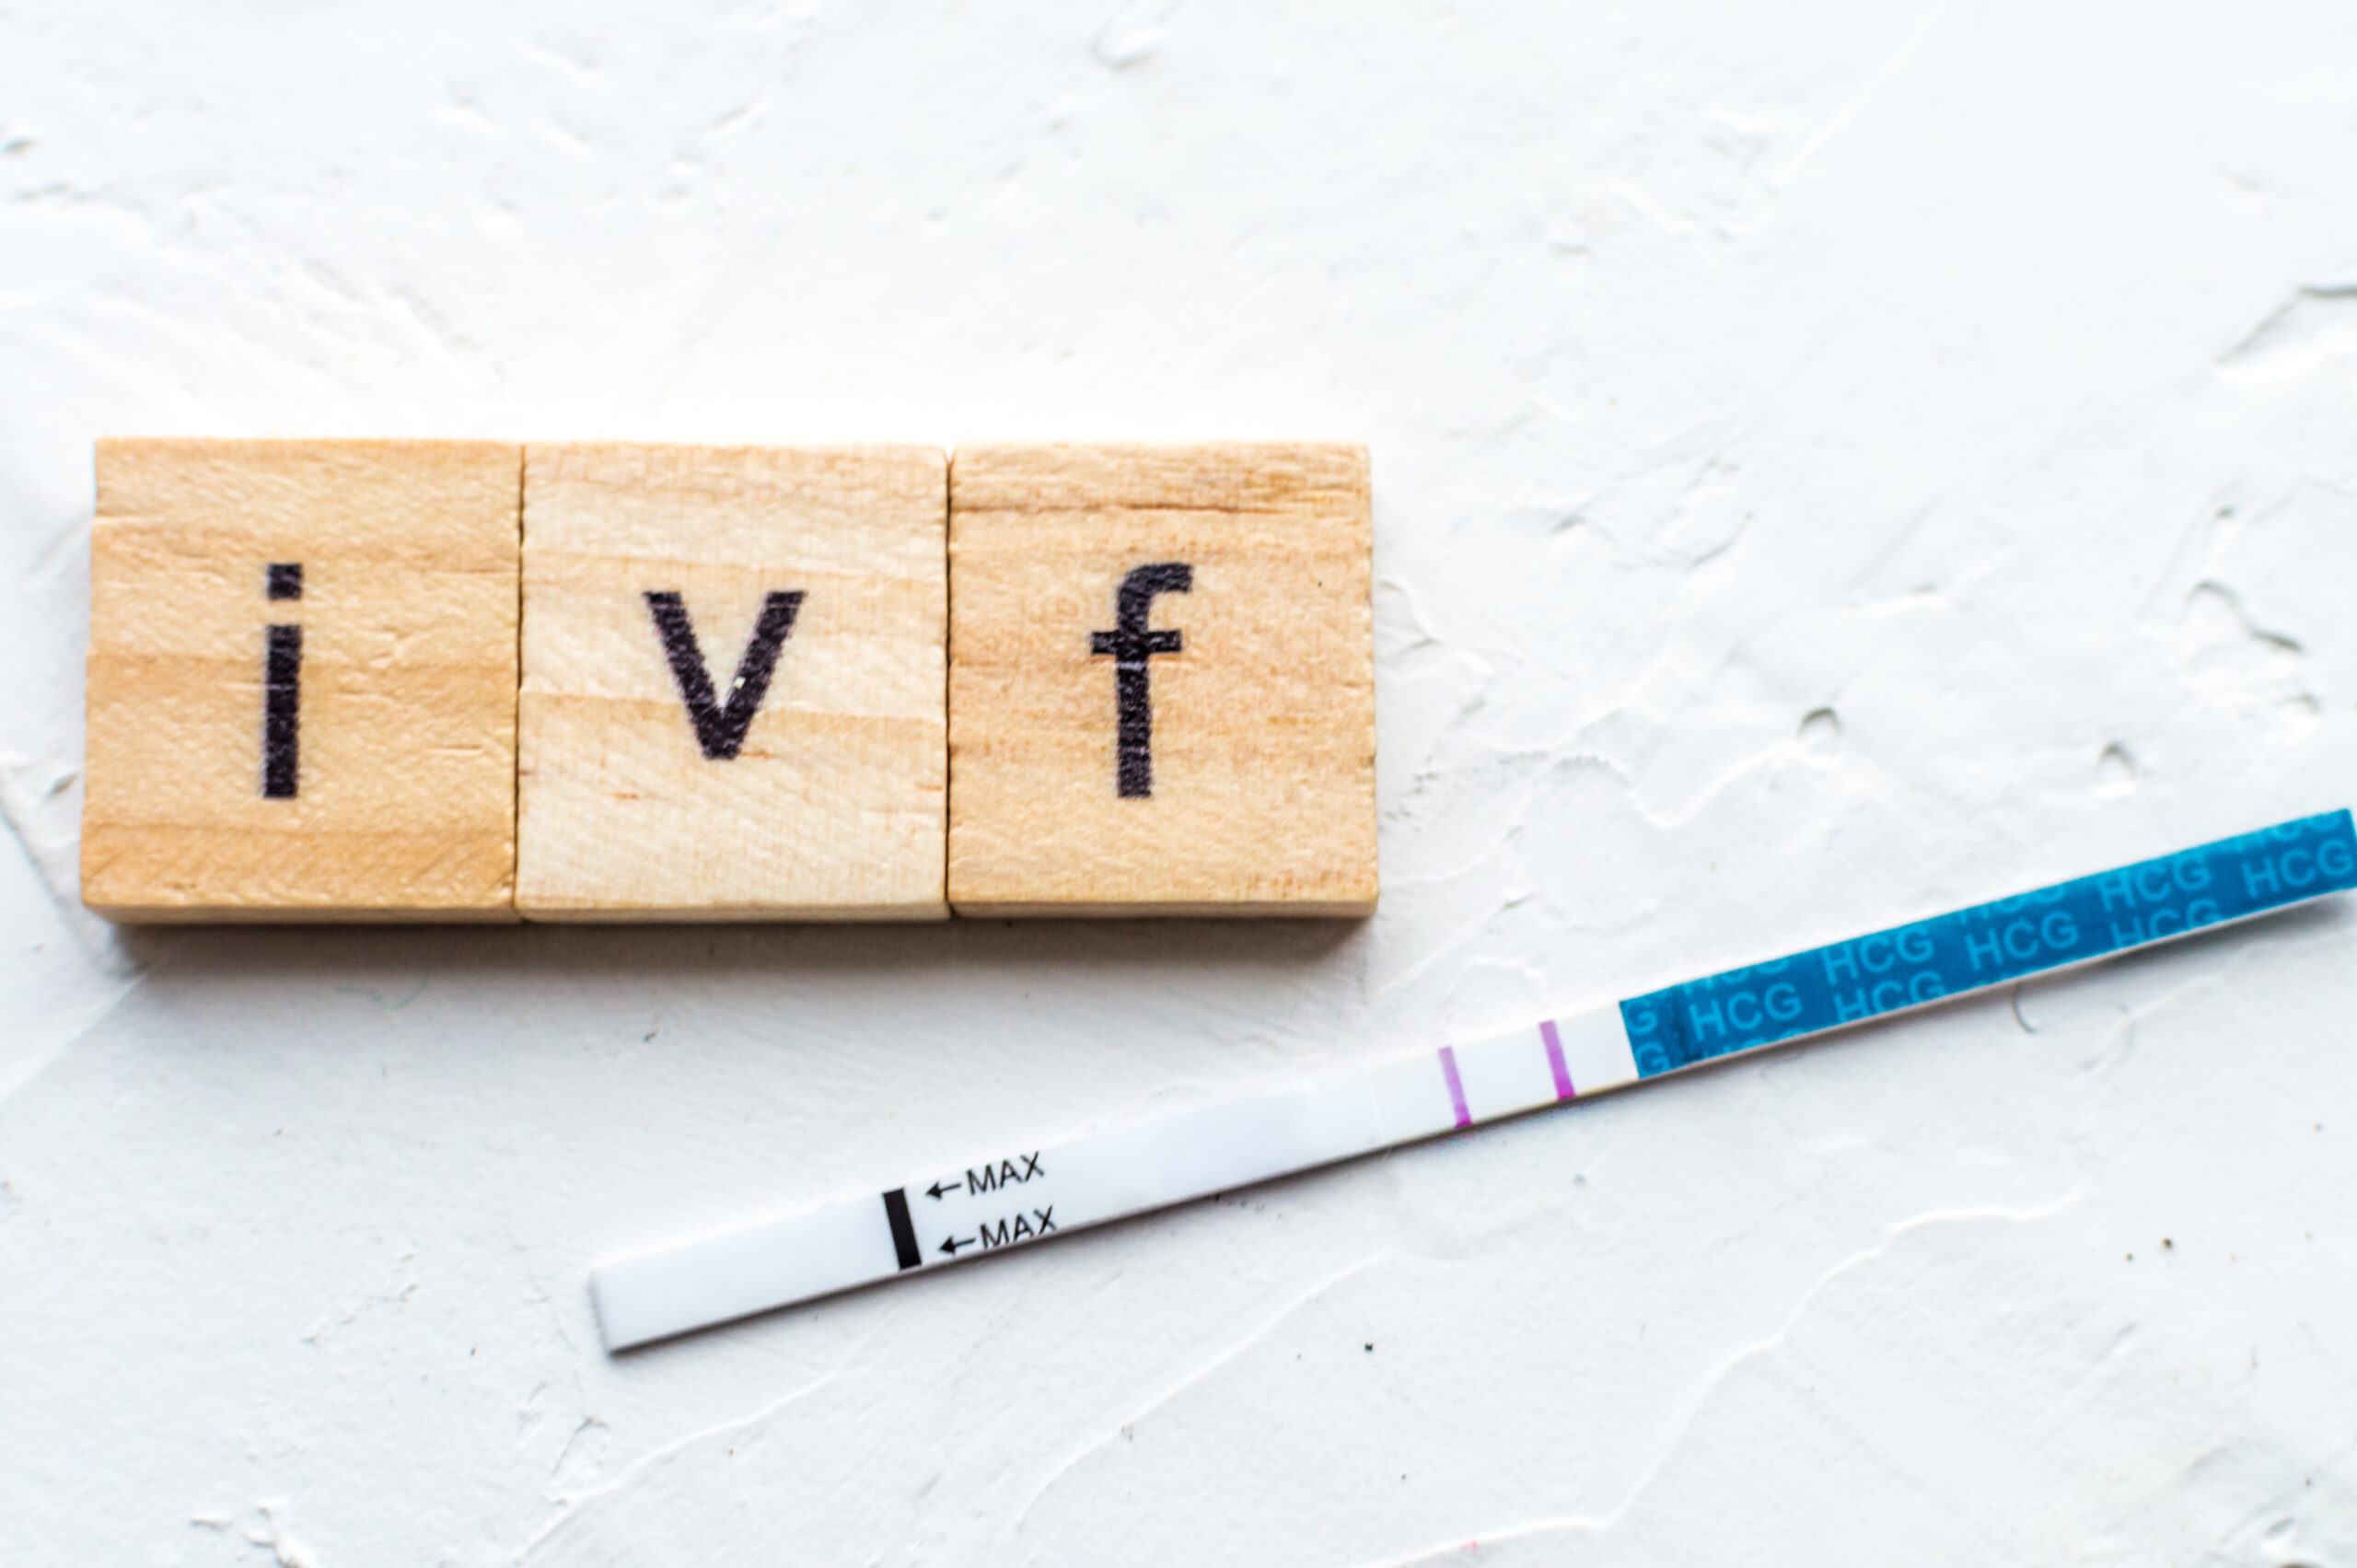 Increasing your chances of successful IVF